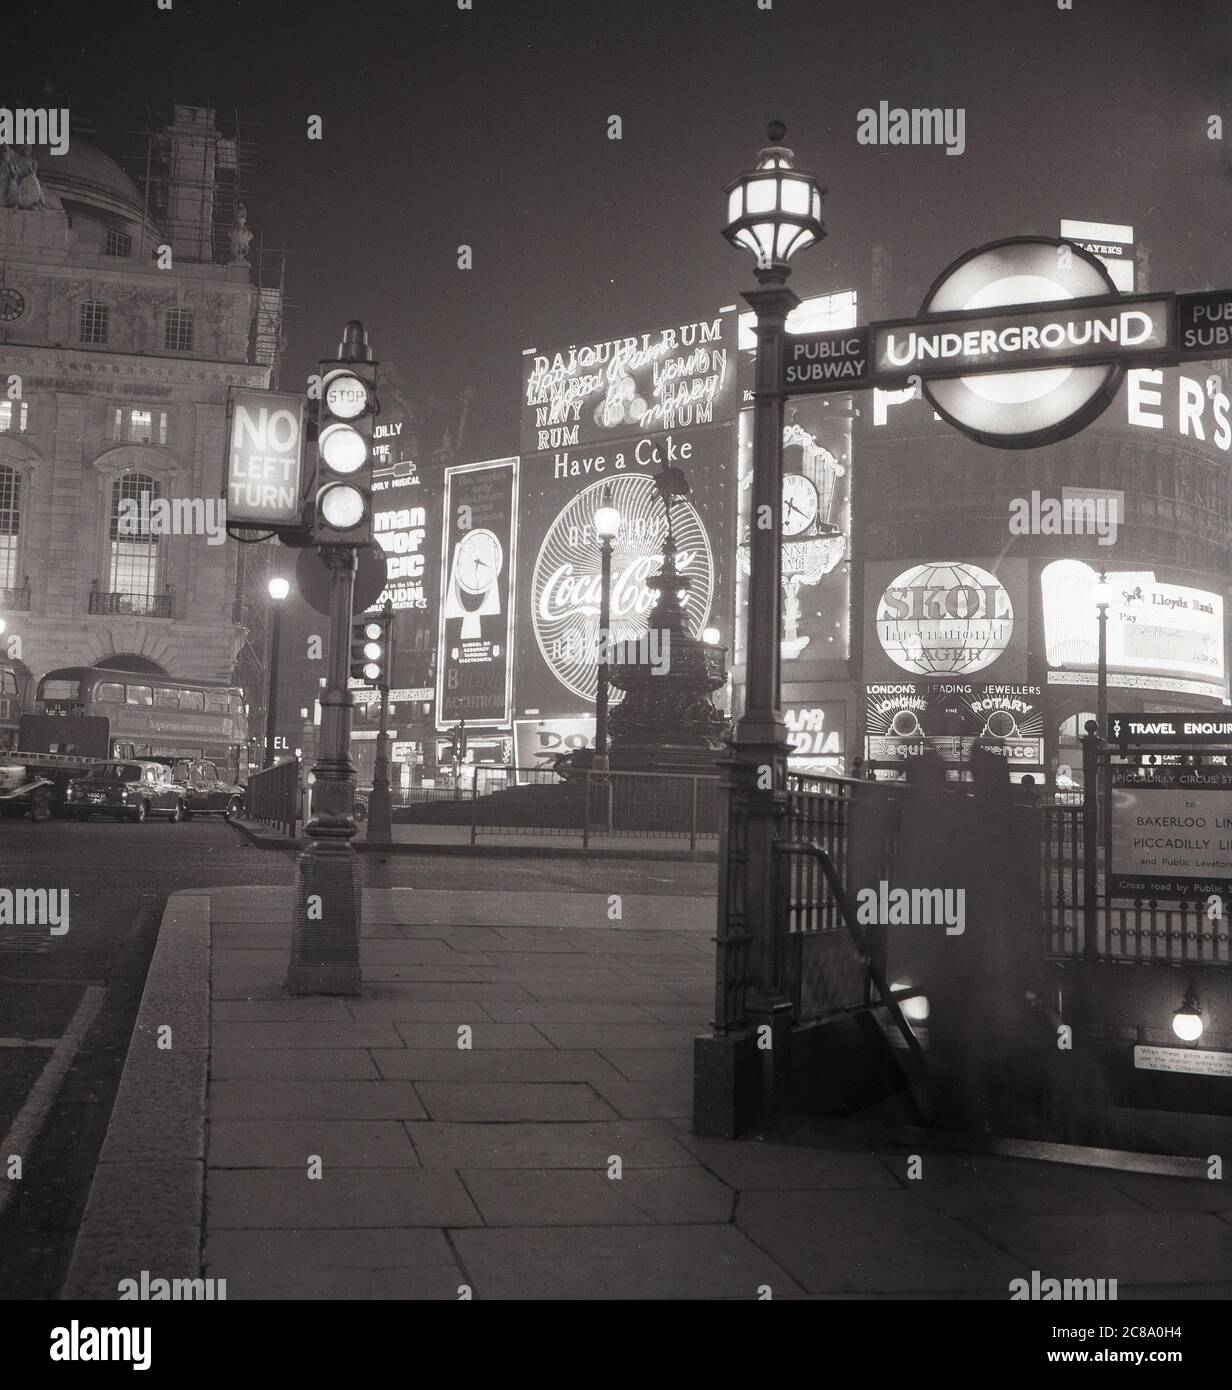 1960s, historical, a view of Piccadilly Circus, Westminster, London, England, UK, showing the famous neon billboards or advertising signs lit-up on the buildings at the roundabout and an entrance to the London Underground, the city's public subway or metro. Stock Photo